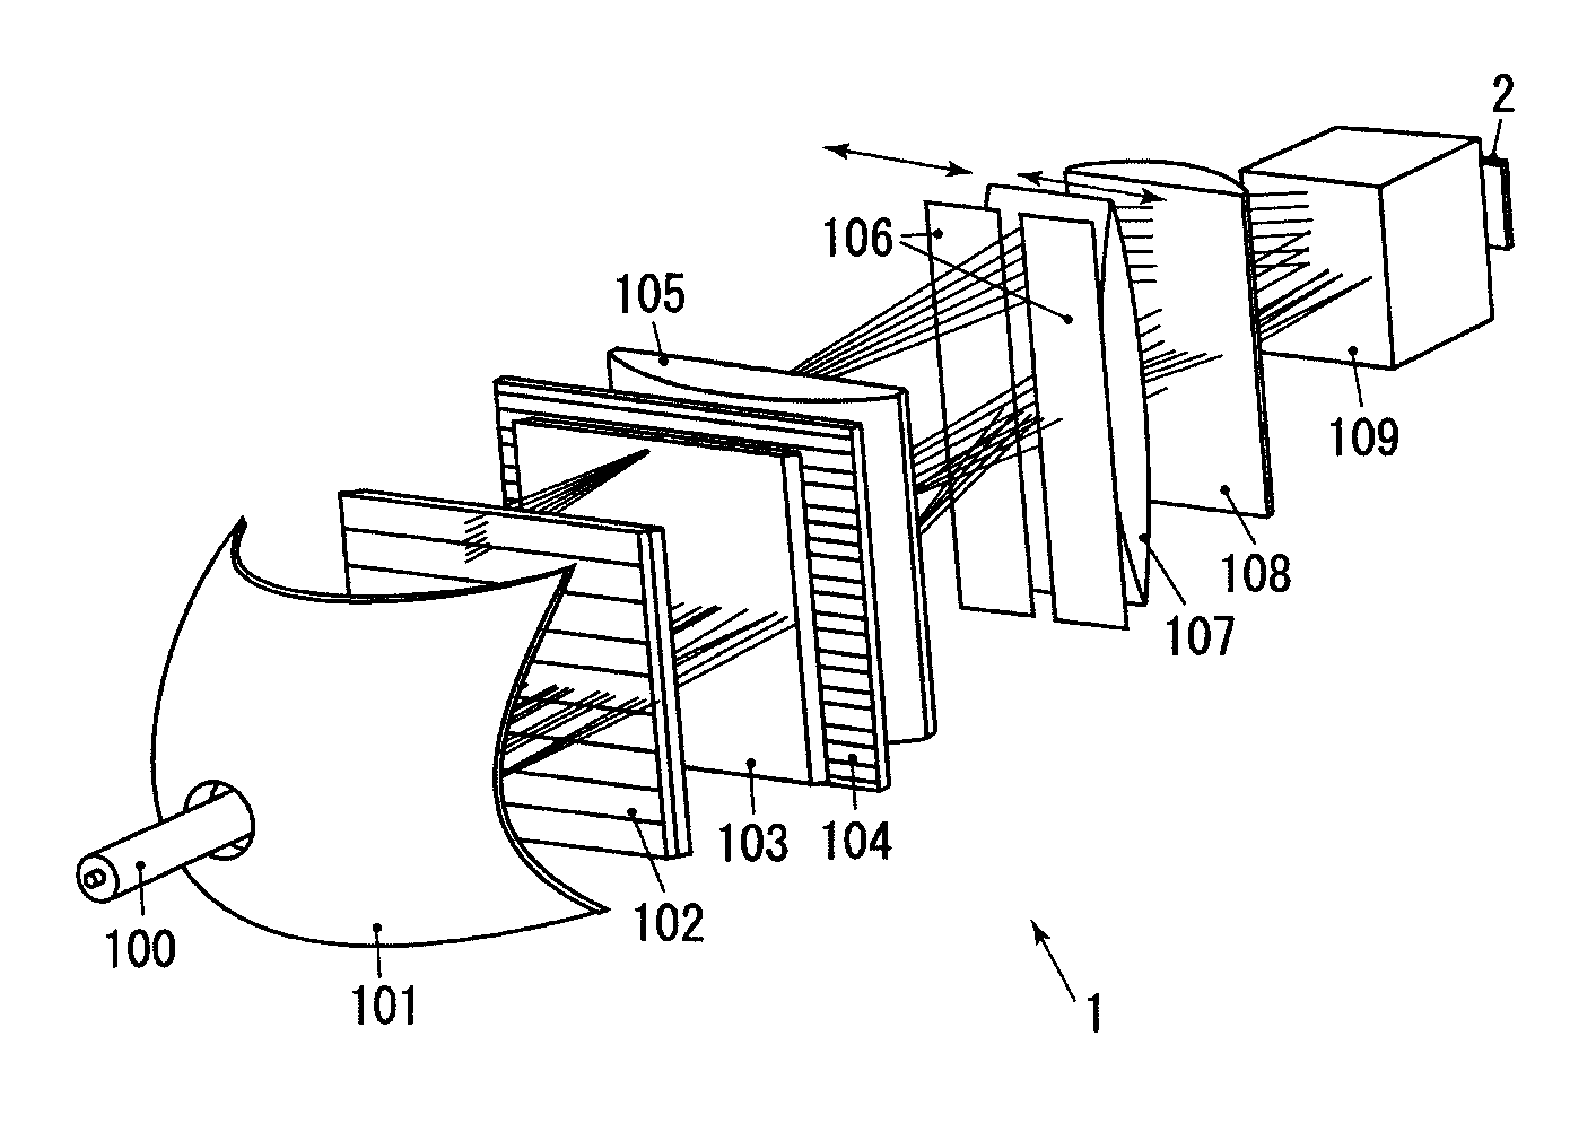 Optical system and image projection apparatus